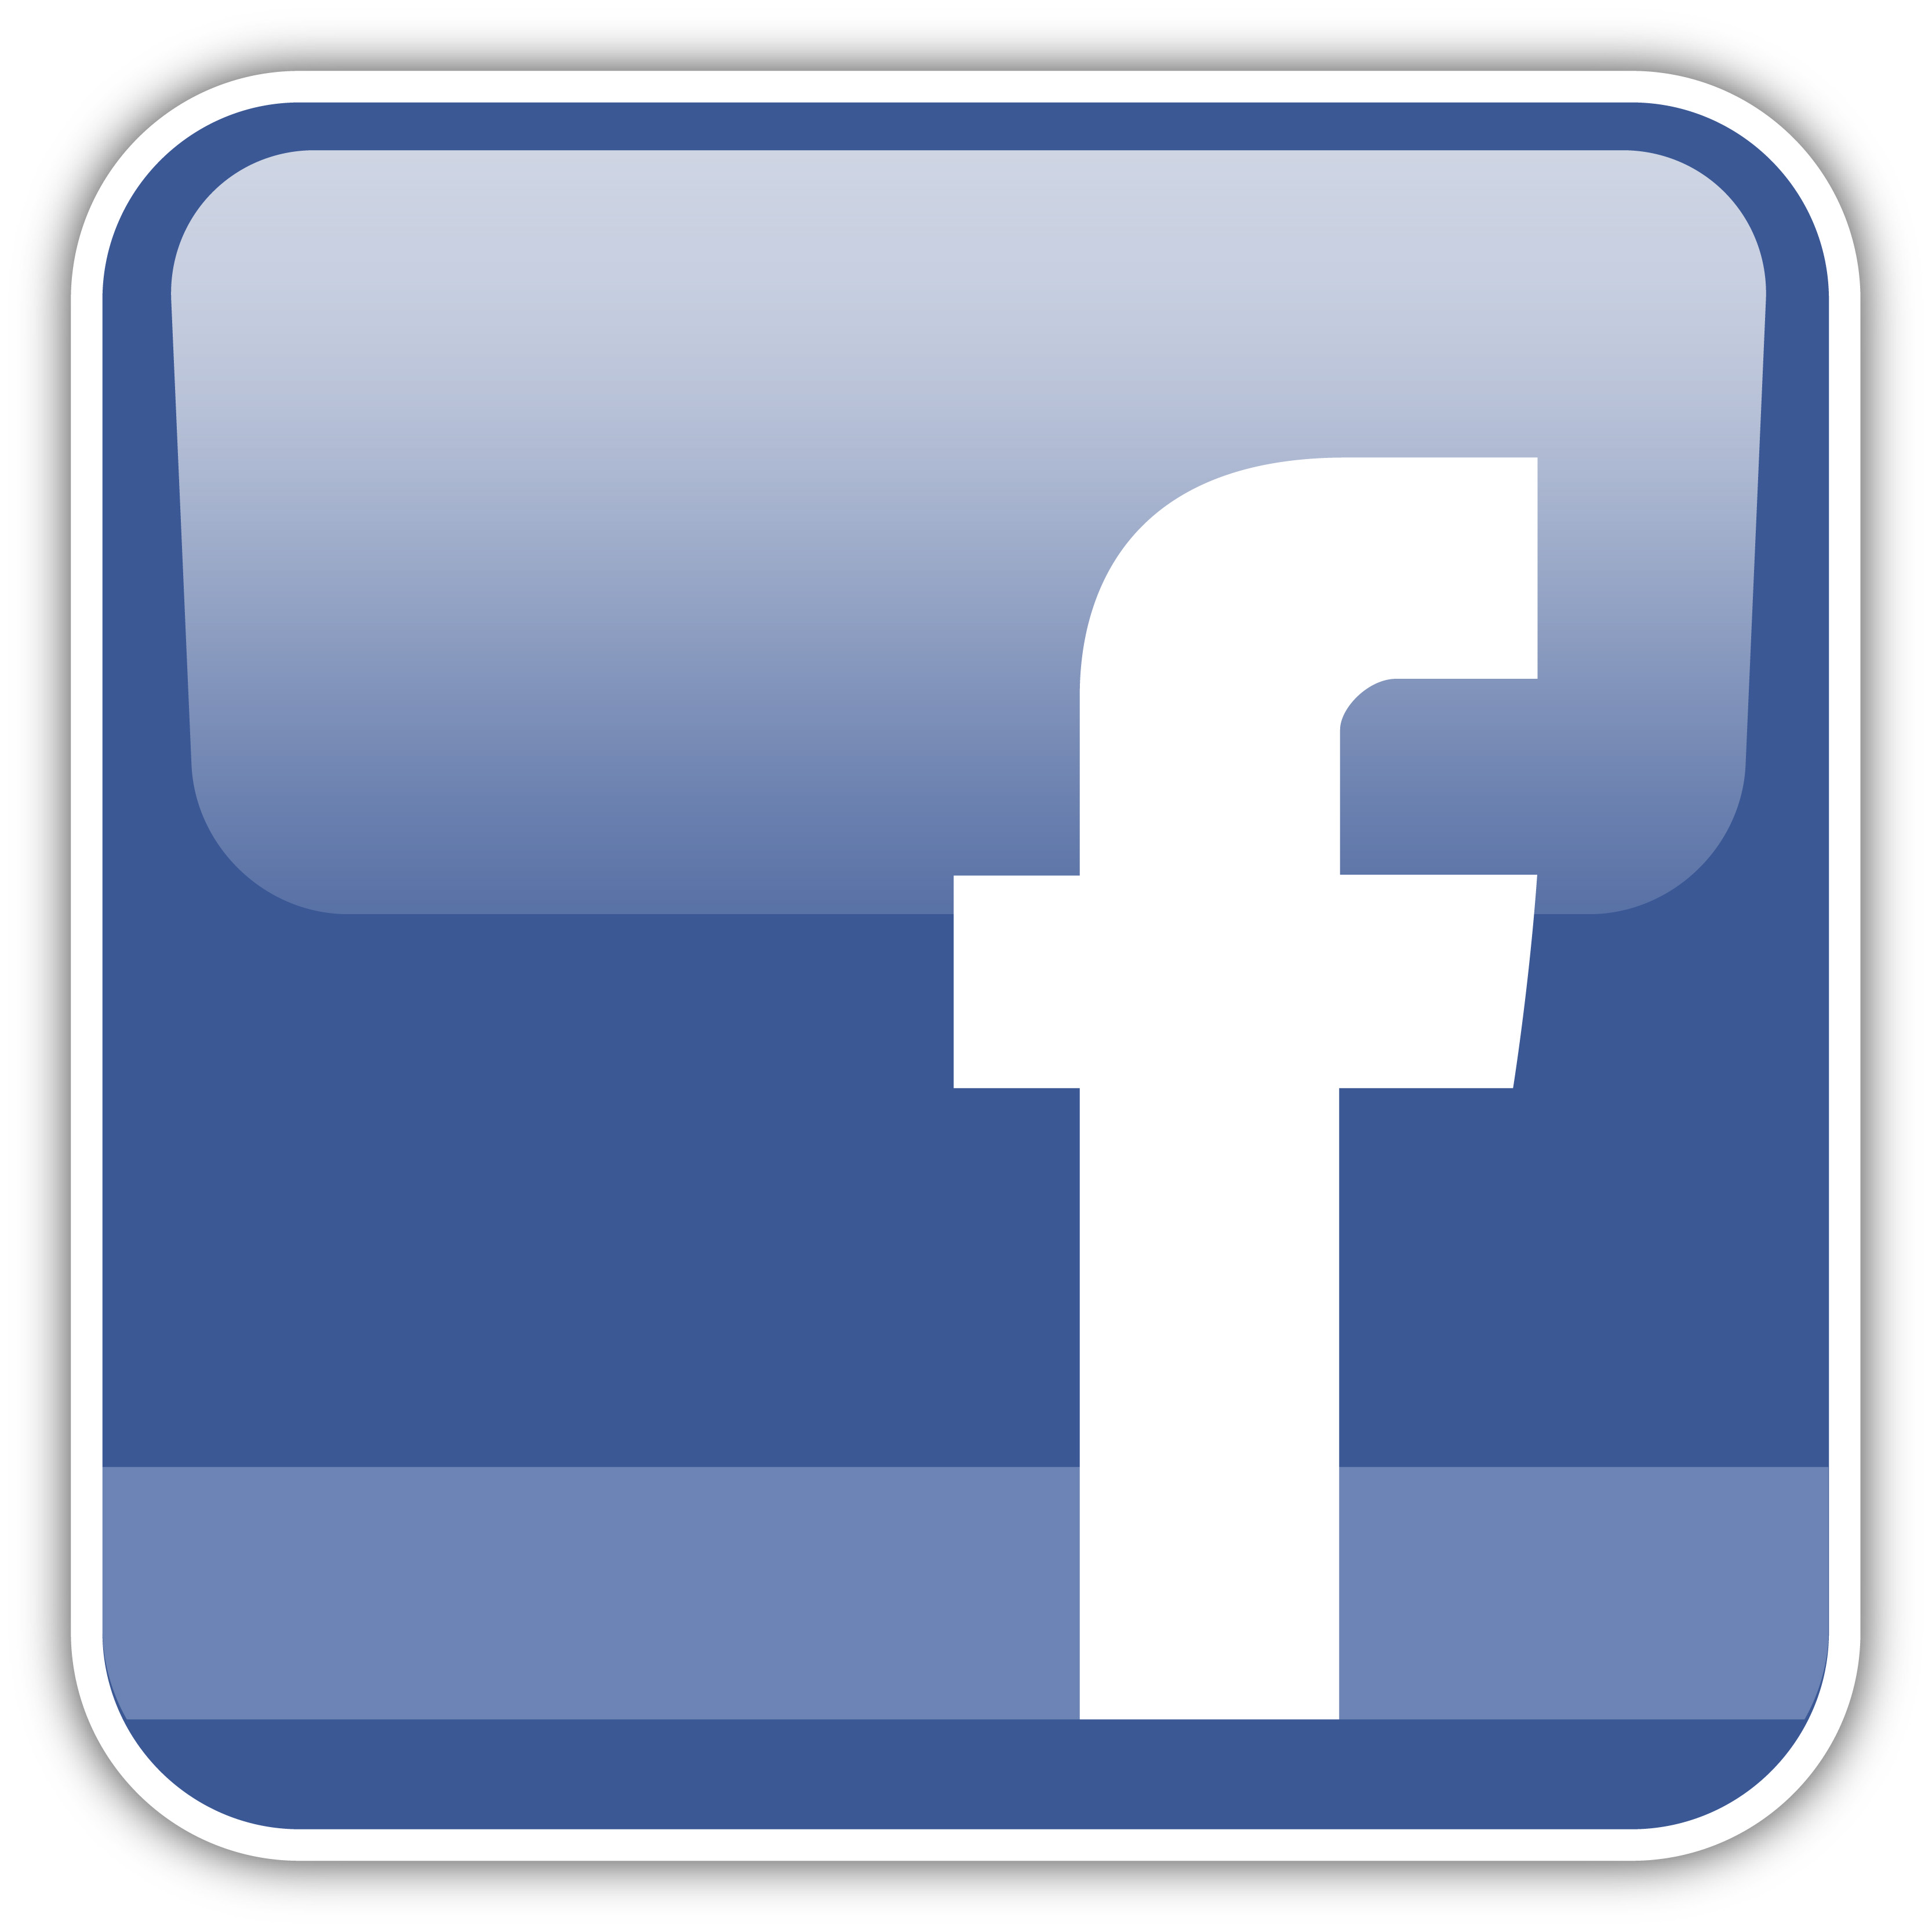 Facebook Scalable Vector Graphics Icon - Facebook logo PNG png 